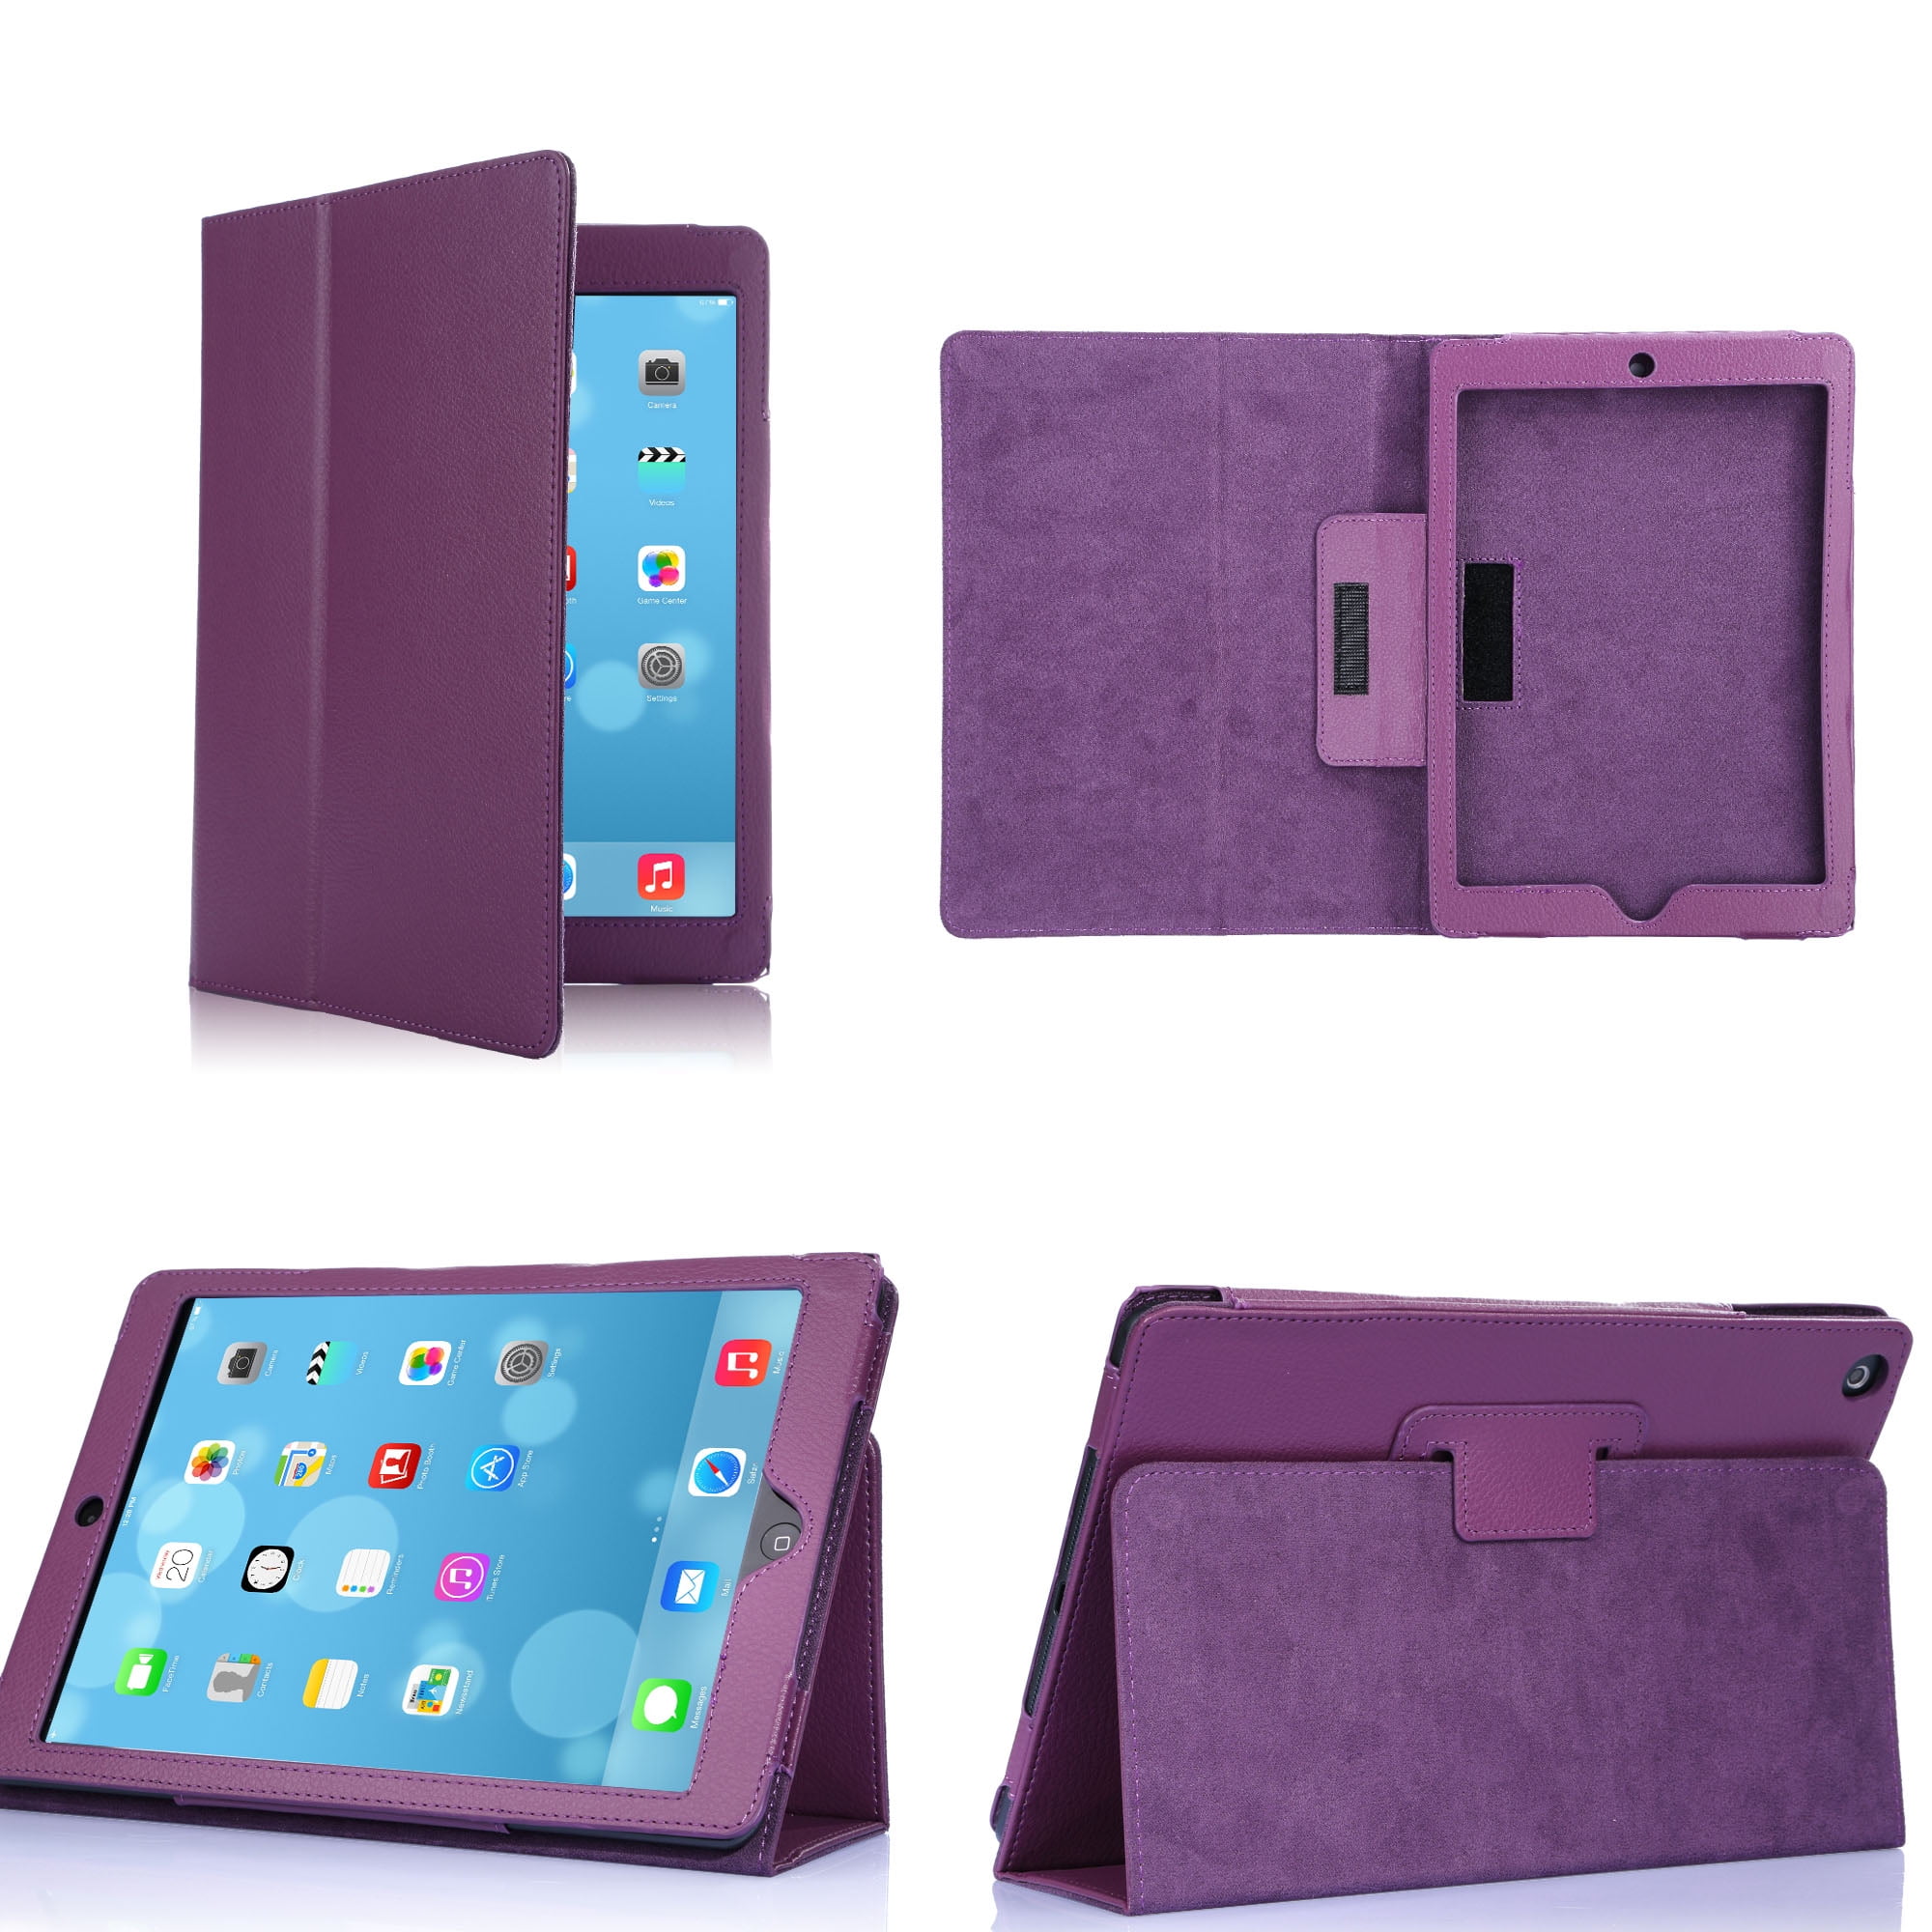 CoastaCloud iPad Air Case PU Leather Smart Cover with Flip Stand Free Screen Protector